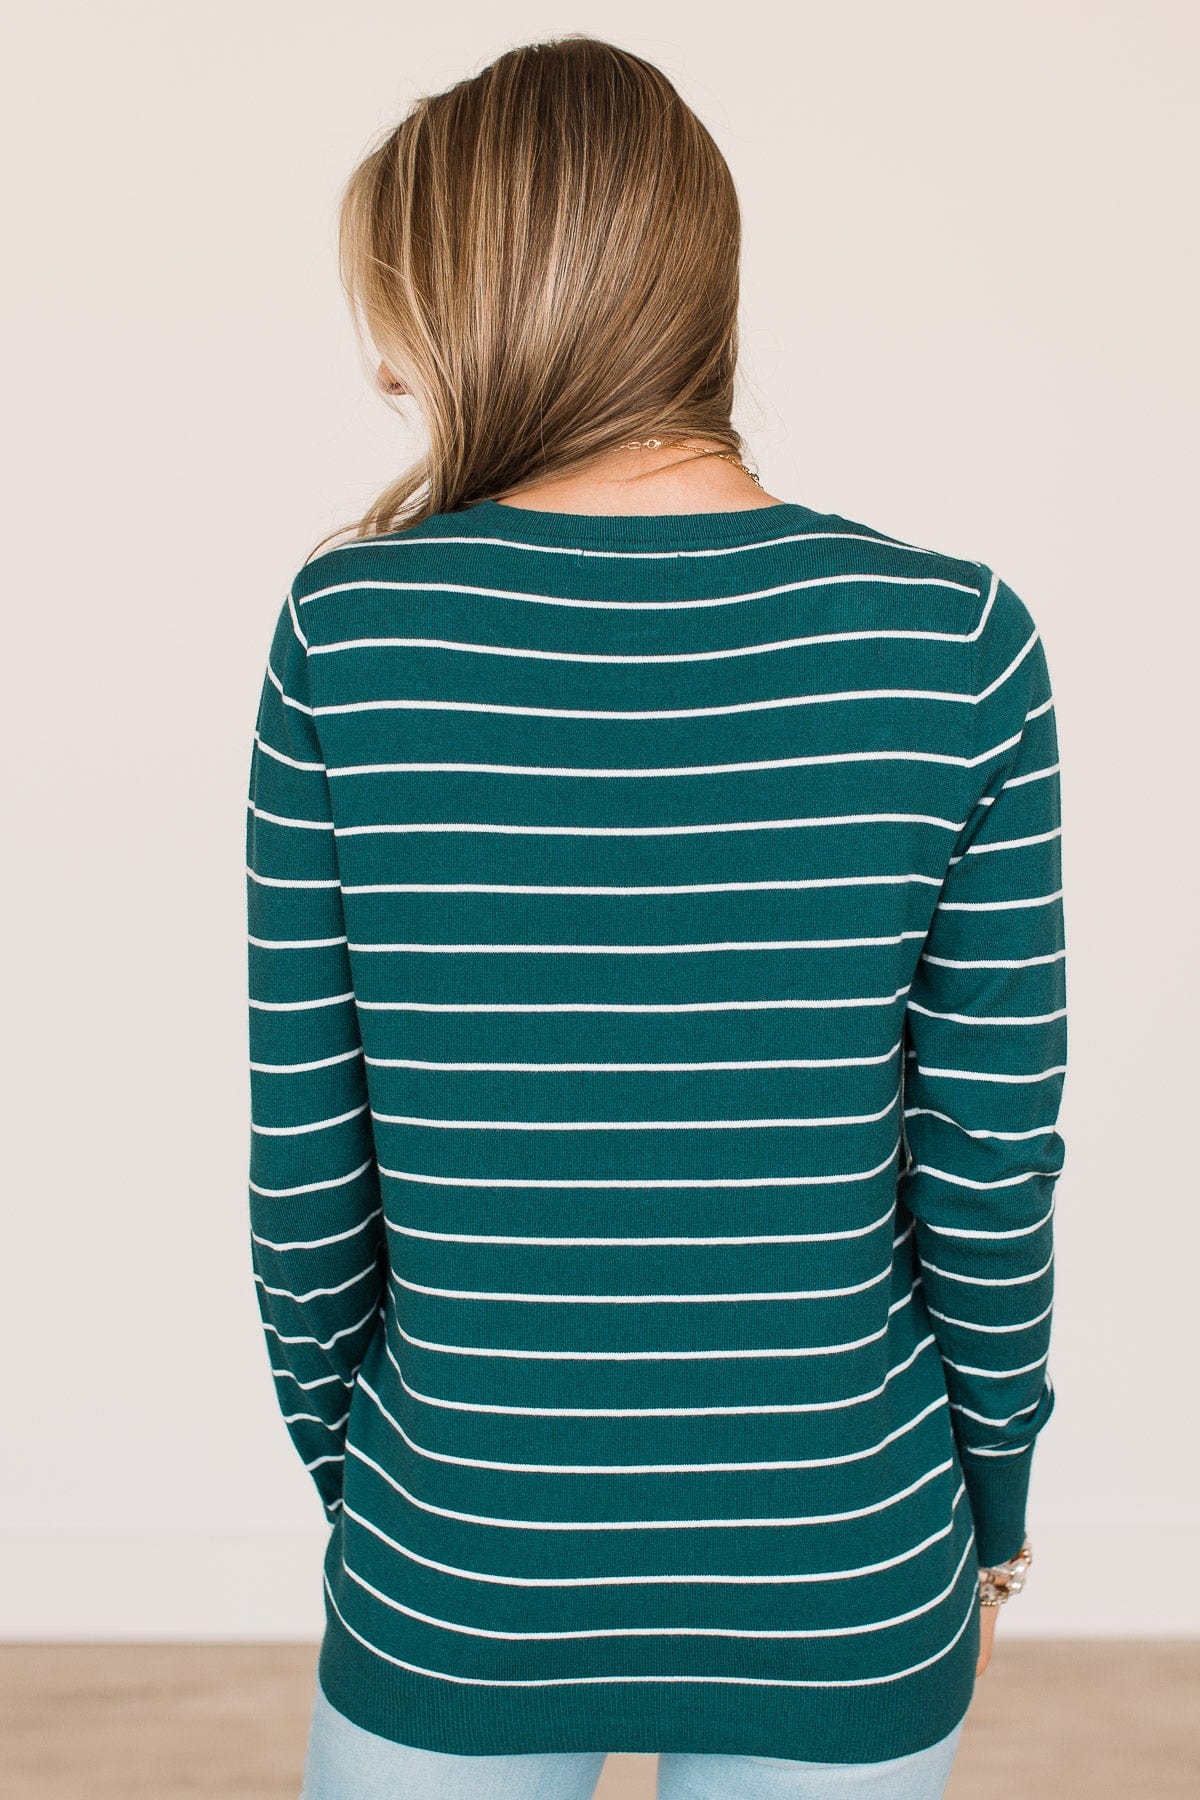 Grateful For You Striped Sweater- Dark Teal